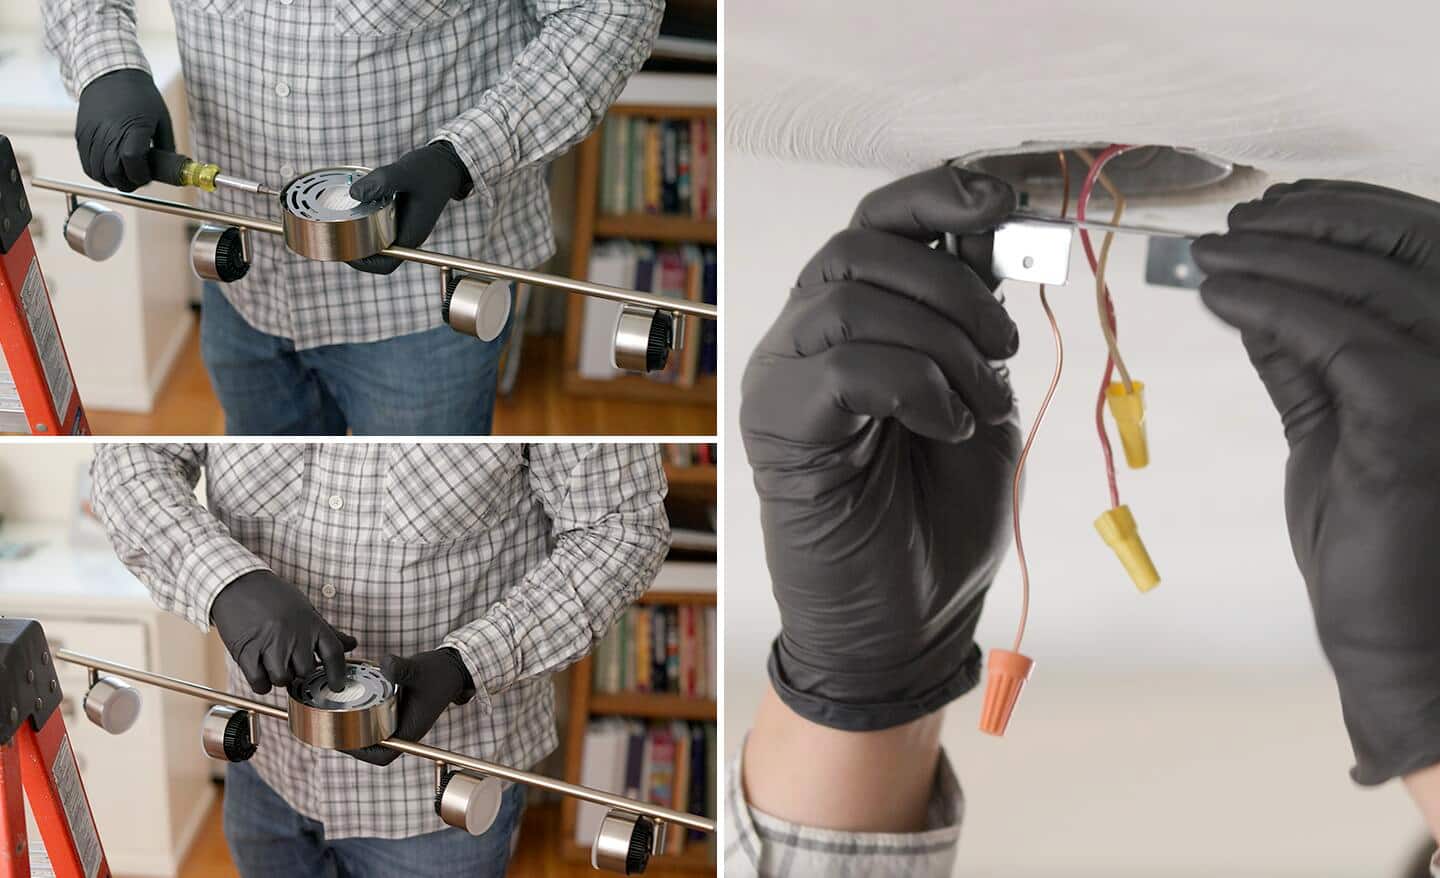 Upper left image: A person unscrews a mounting plate from a new, uninstalled track light. Bottom left image: Person removes a mounting plate from an uninstalled track light. Right image: A person places a mounting plate onto the ceiling's electrical box.